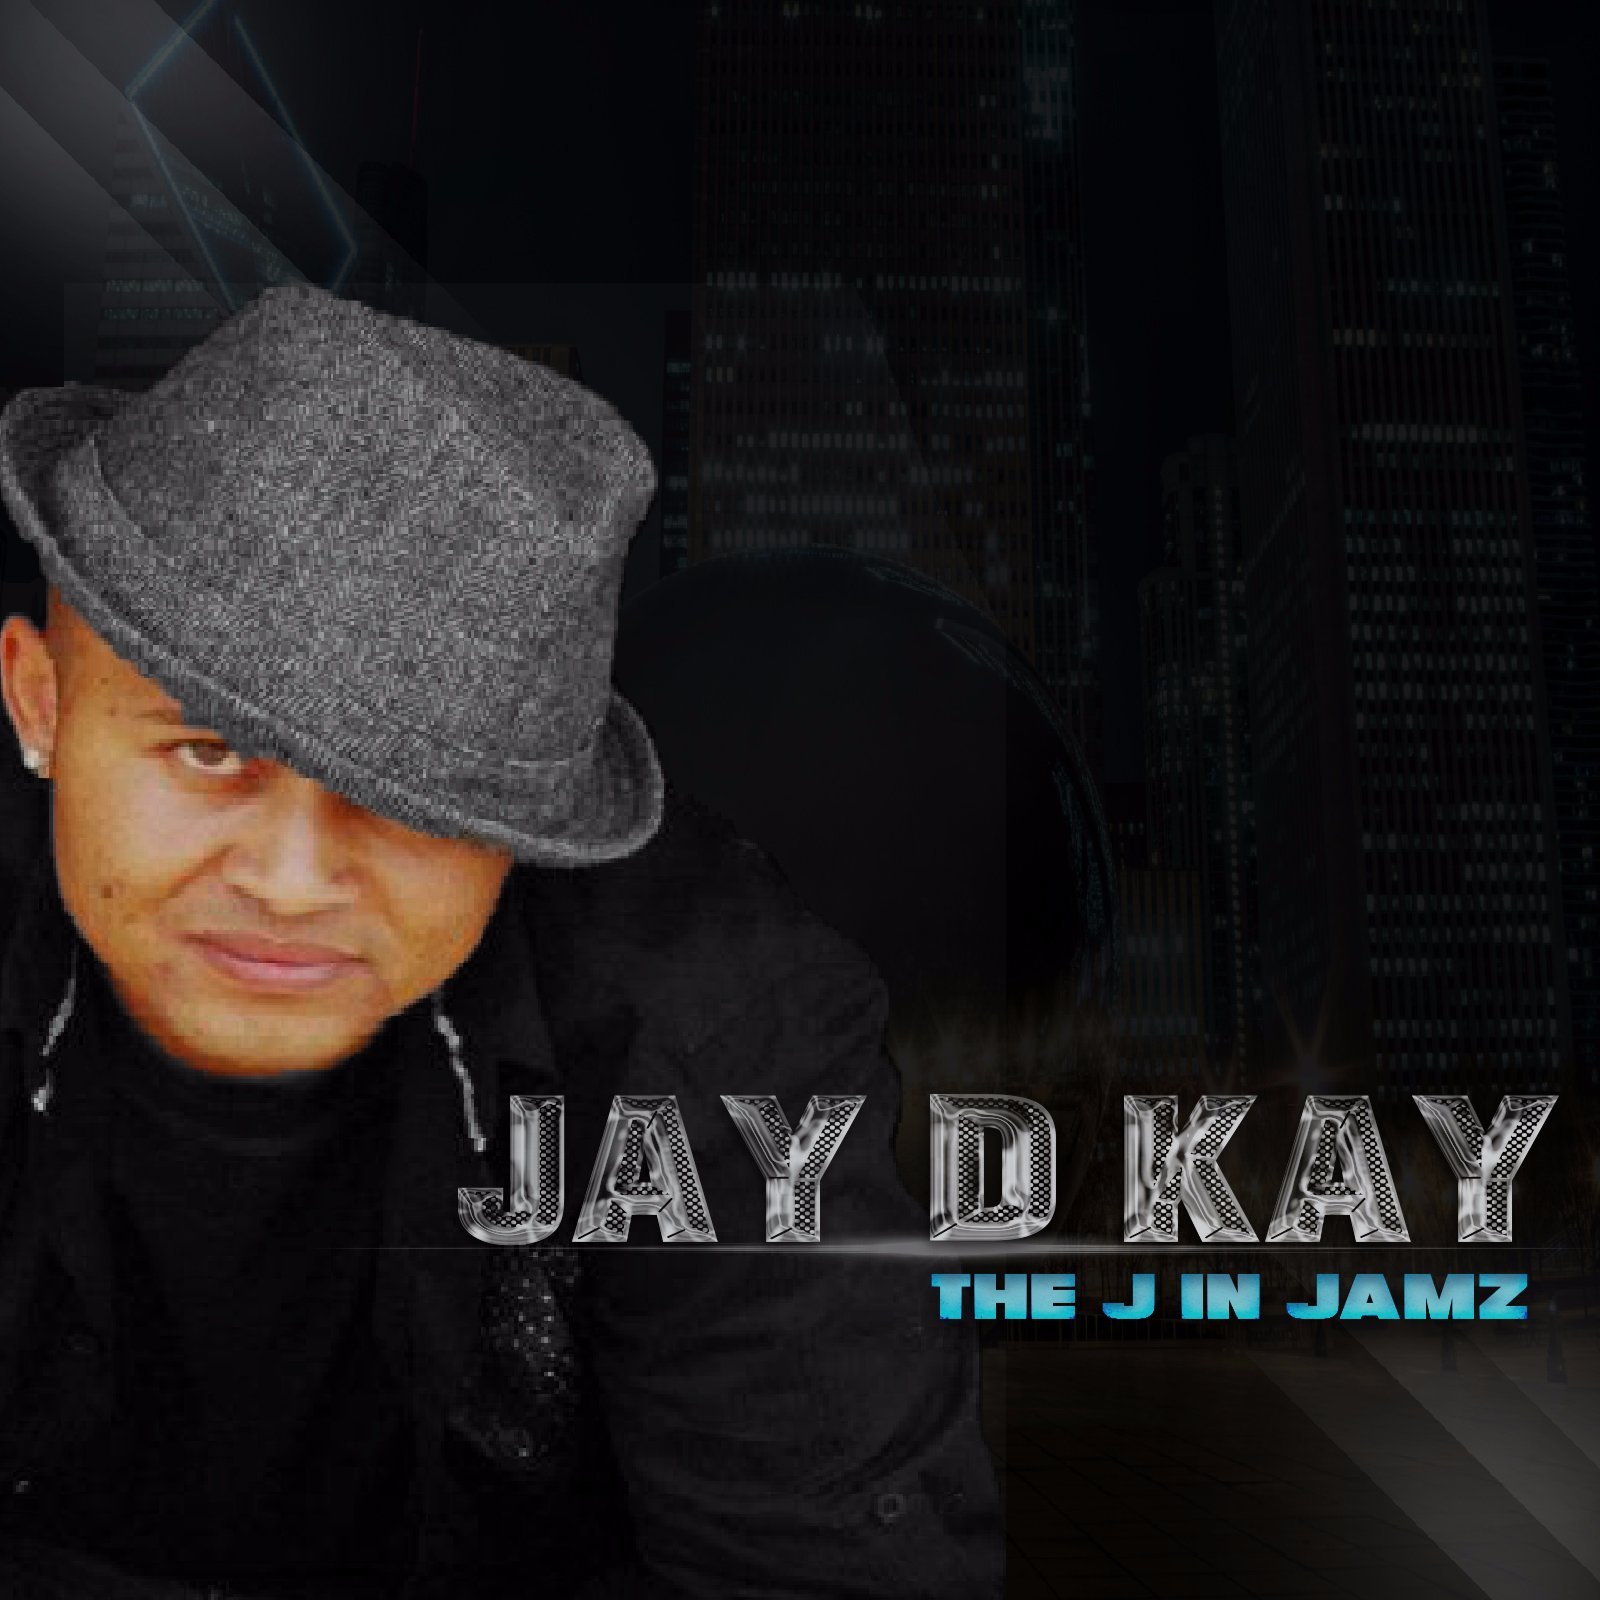 Singer, Songwriter, Radio DJ, Voice Over Artist, FreeLance Actor, Life Coach For Bookings jaydkay@live.com